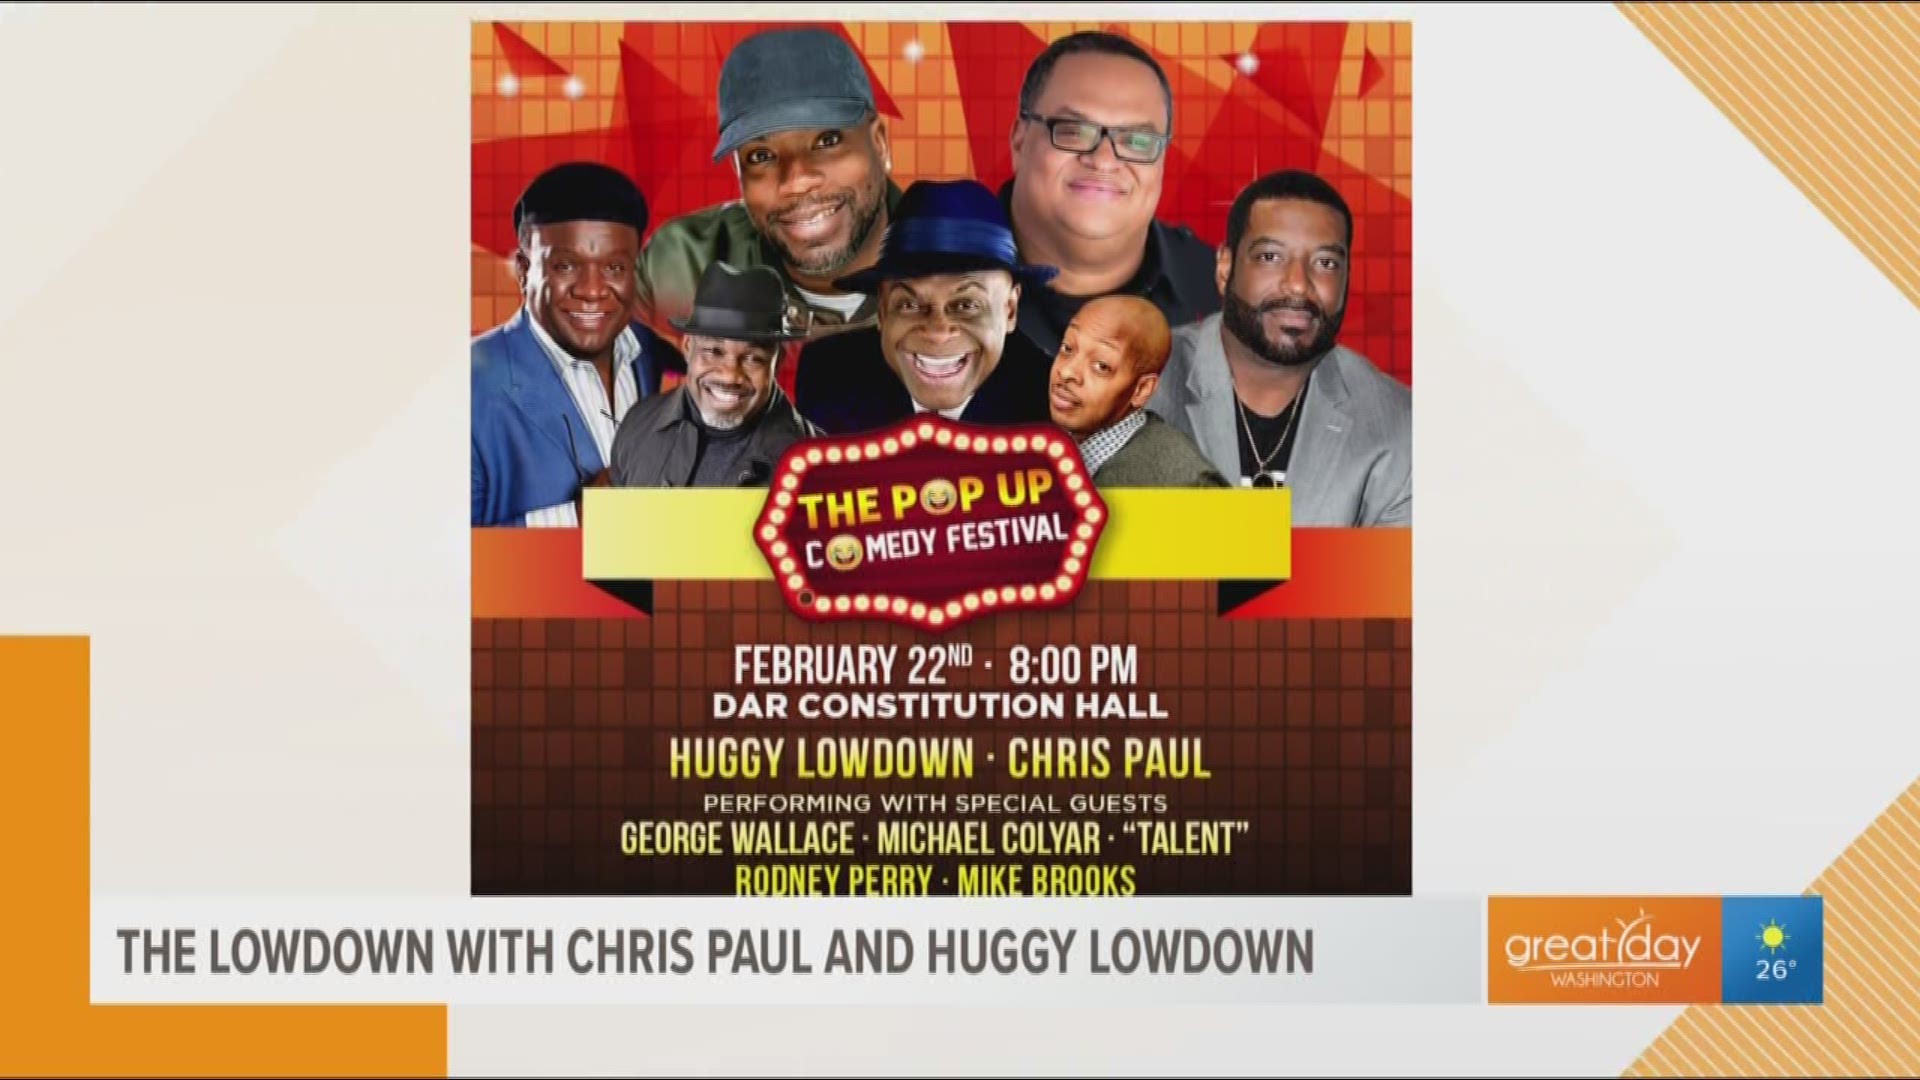 Huggy Lowdown and Chris Paul talk about their time working with Tom Joyner, Tony Perkins and their pop up comedy show.